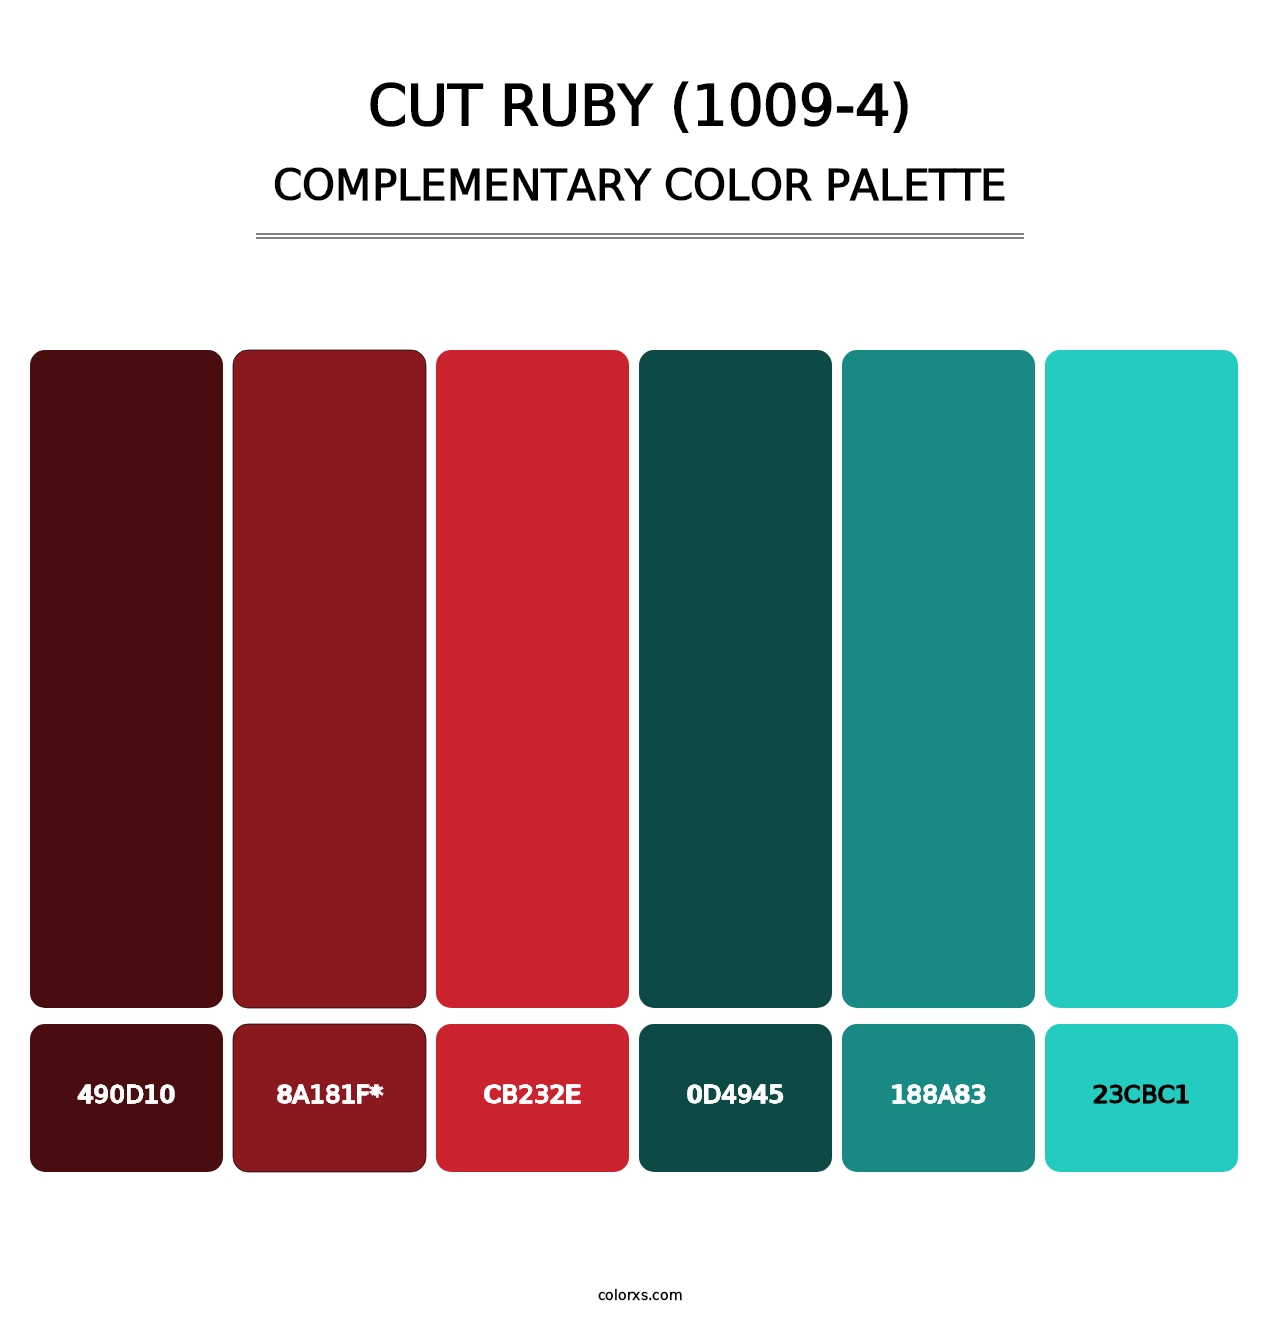 Cut Ruby (1009-4) - Complementary Color Palette